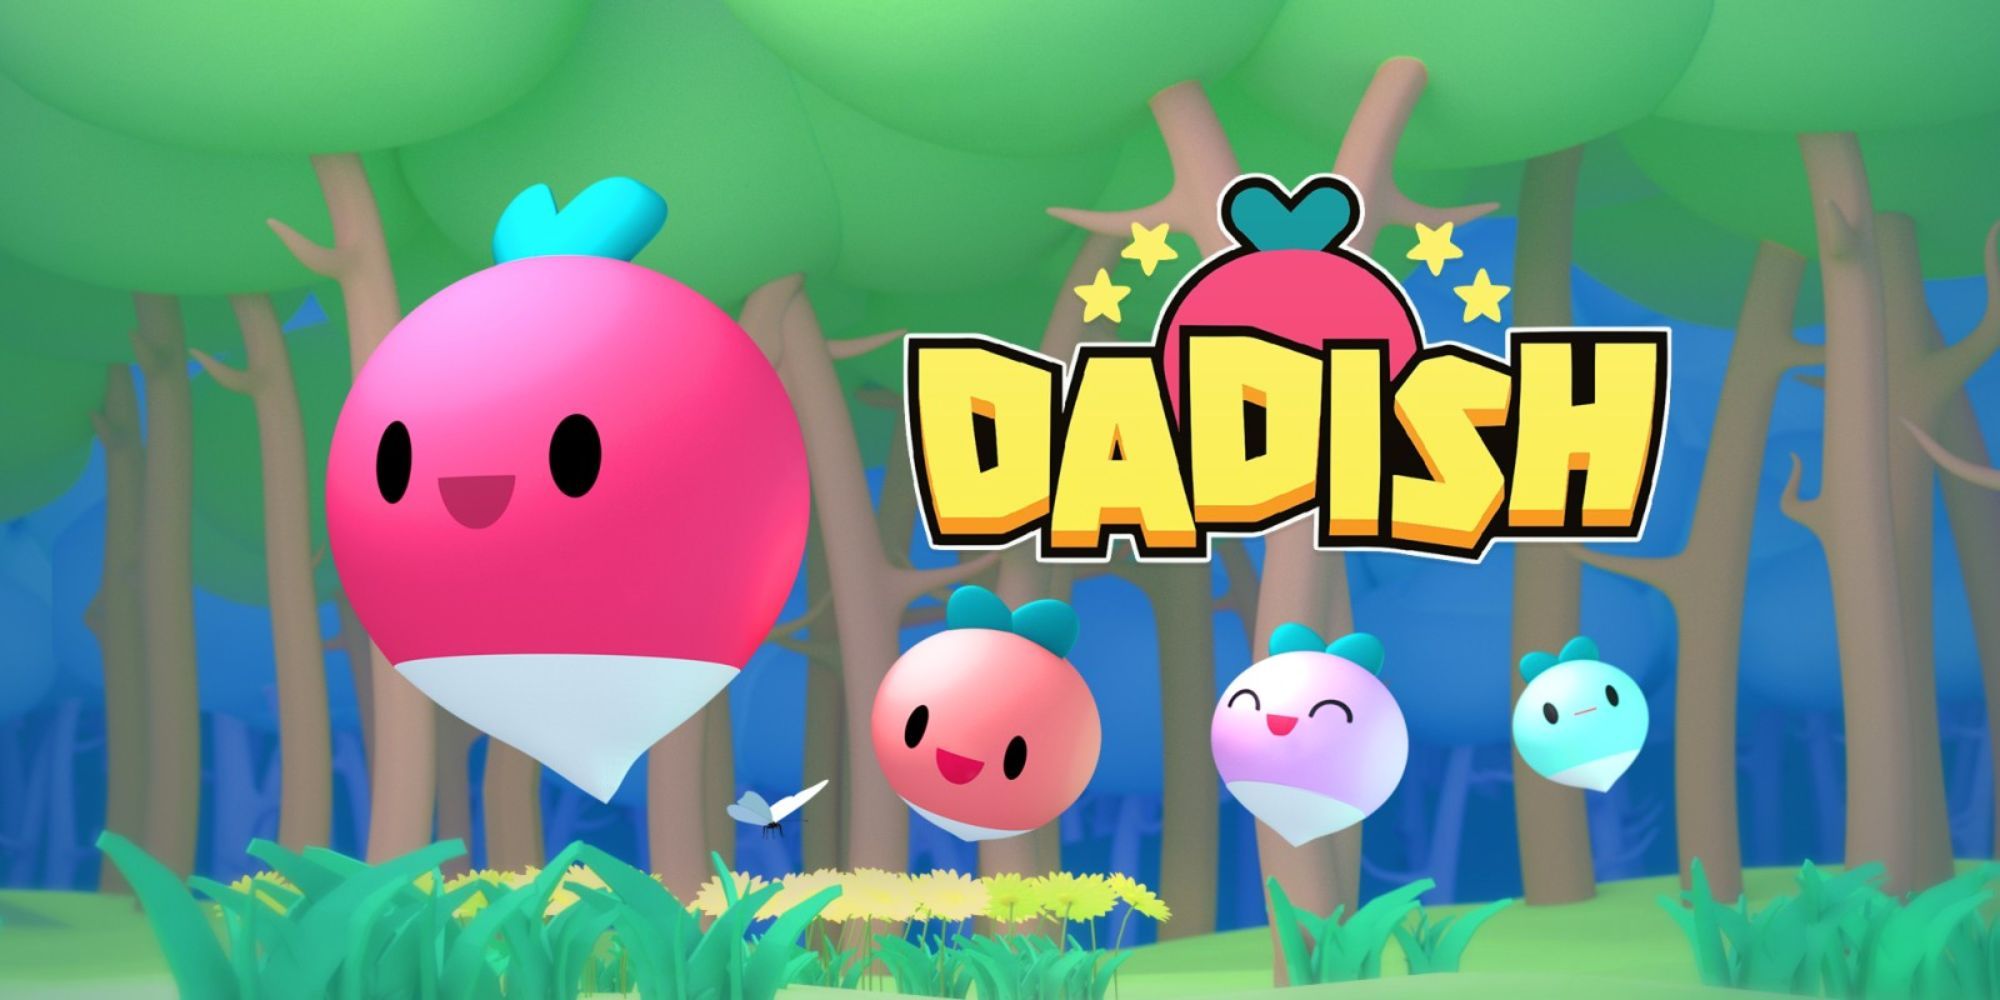 Dadish game radish with face and game title 